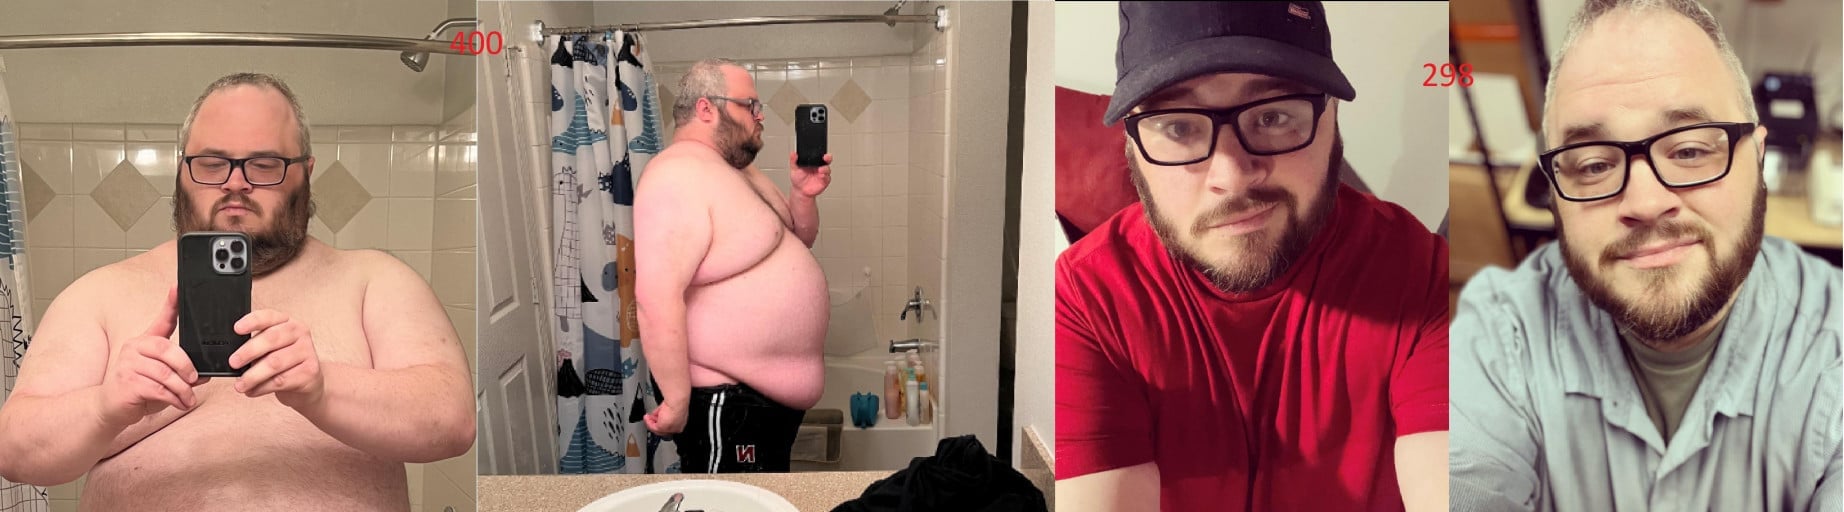 A before and after photo of a 5'11" male showing a weight reduction from 400 pounds to 298 pounds. A total loss of 102 pounds.